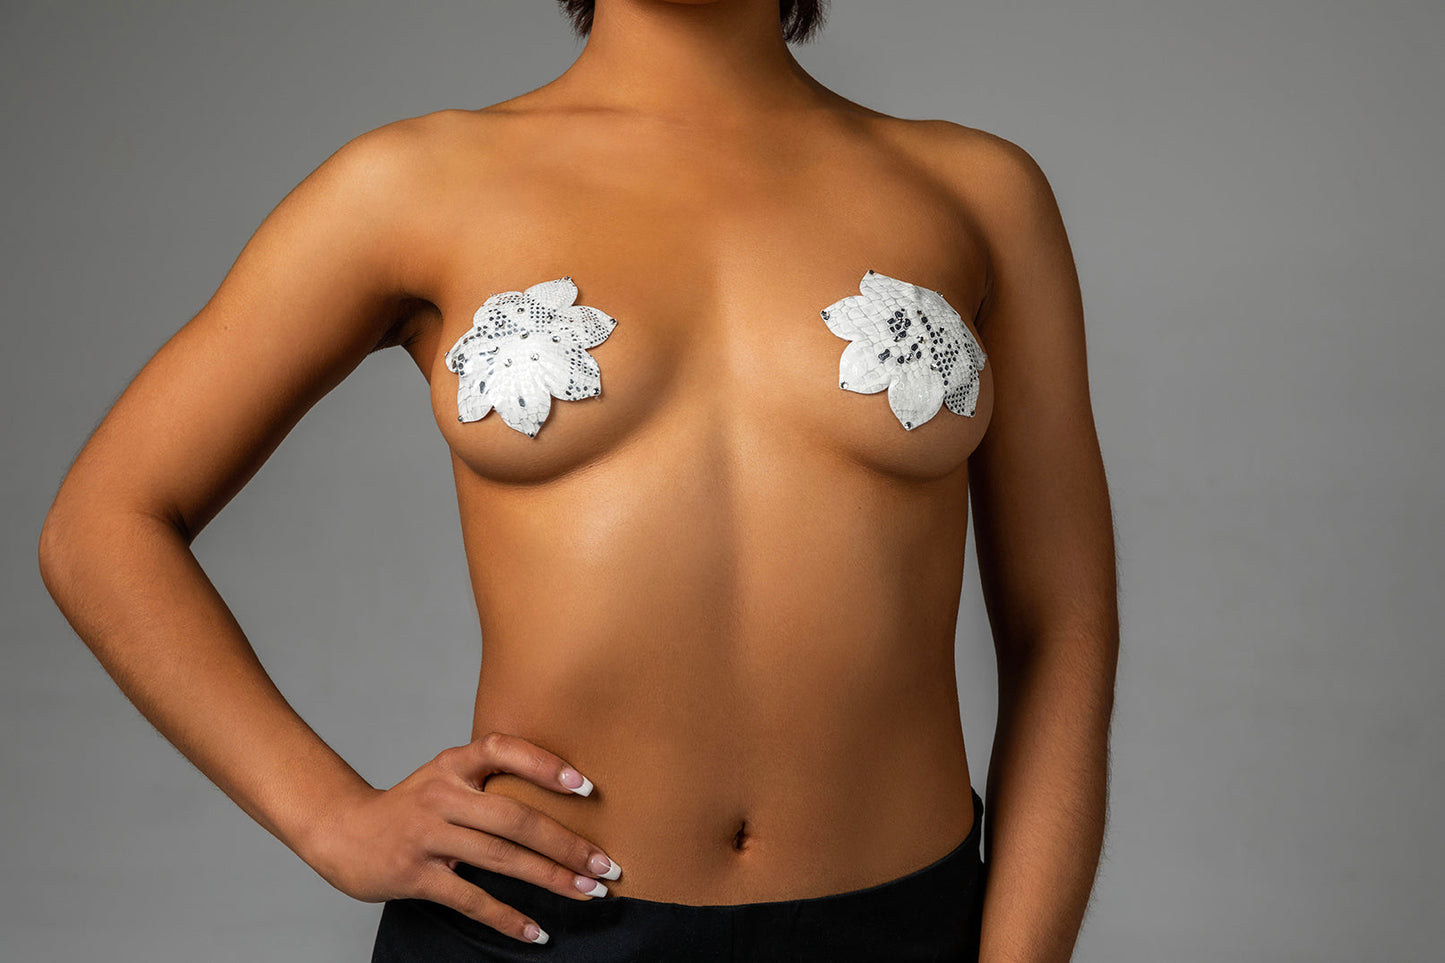 A model wearing the White Athens Deluxe Reusable Pasties by Blissidy.